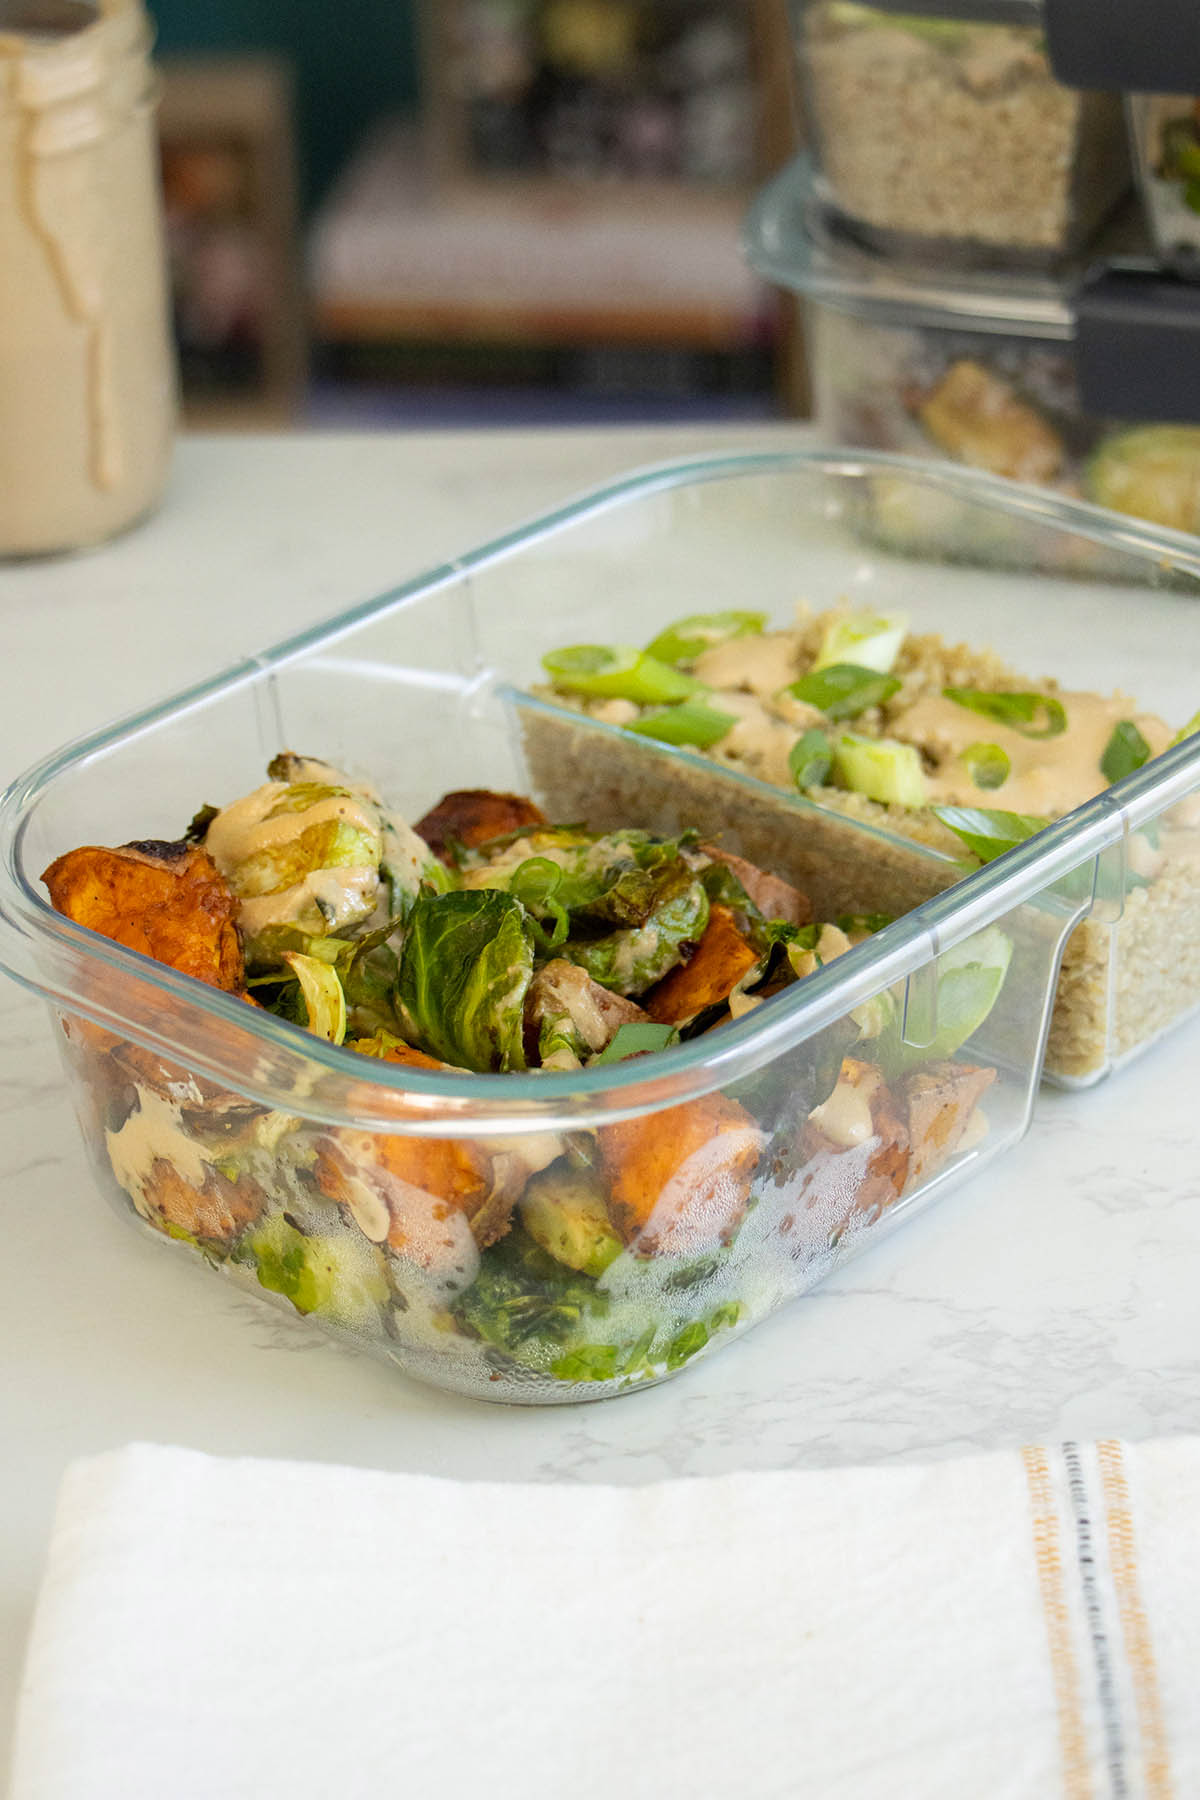 Brussels sprouts meal prep in an open lunchbox with a stack of lunchboxes behind it and the sauce in a jar on the table